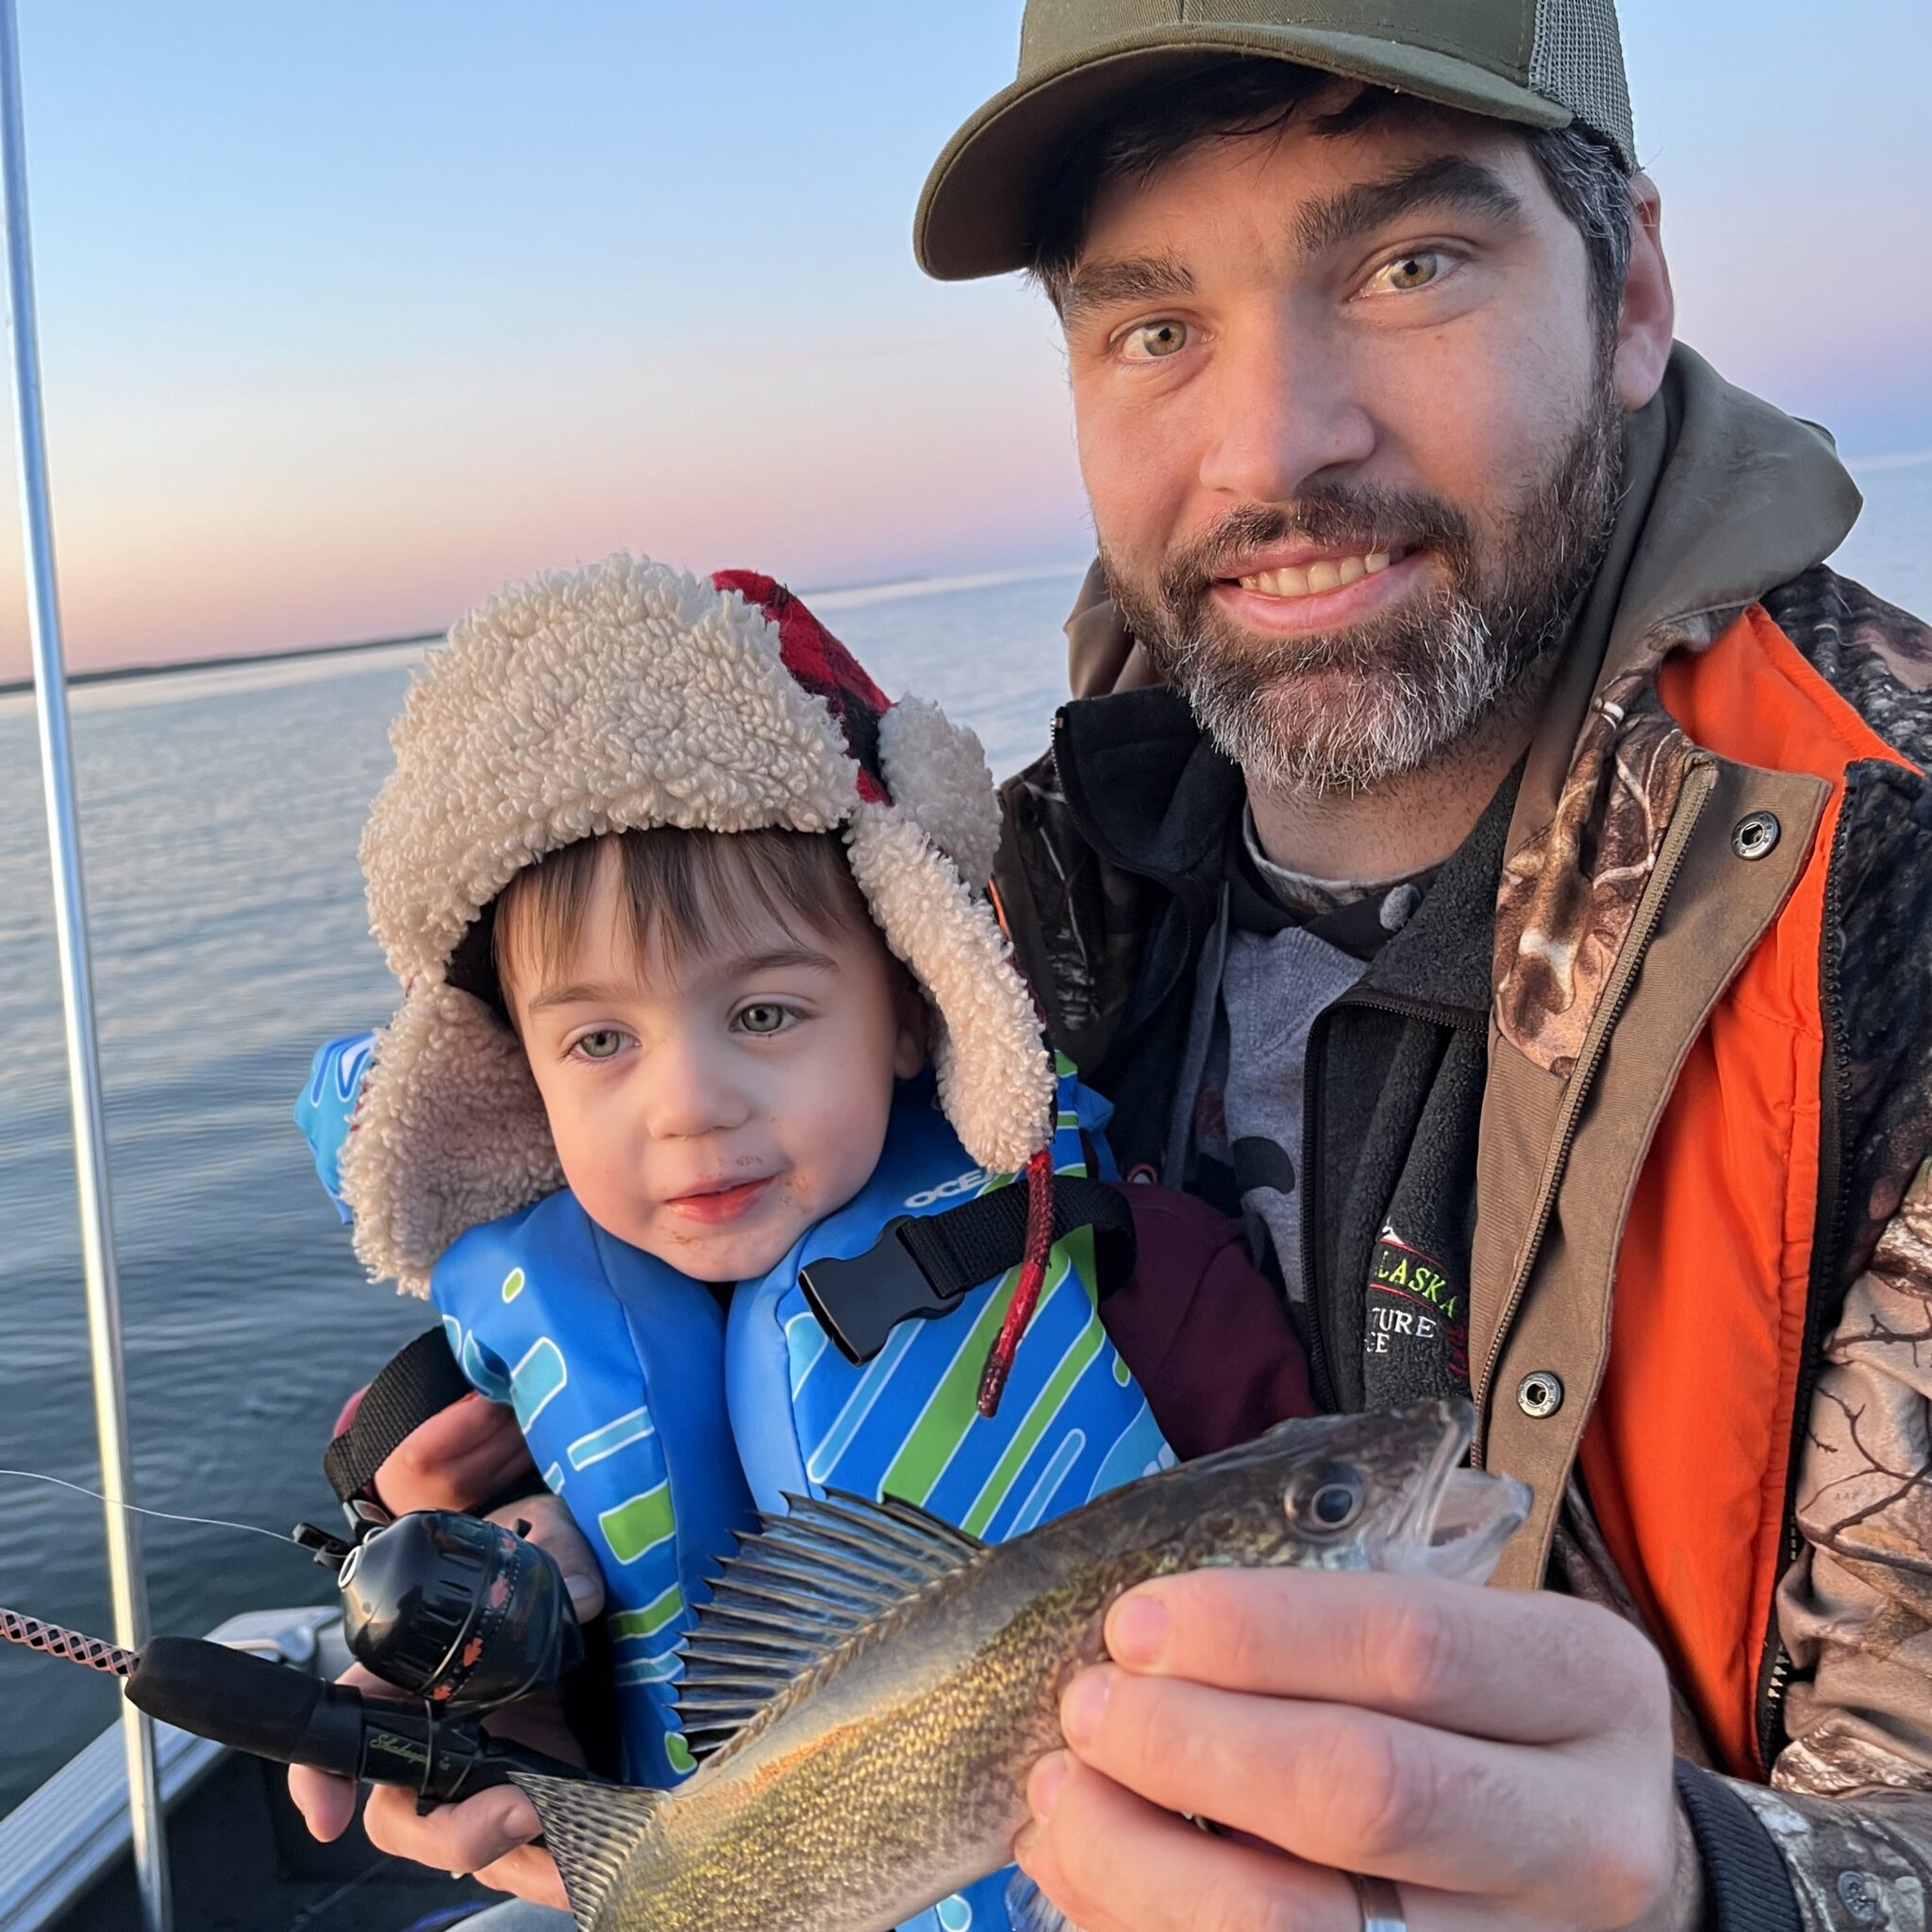 Father and Son Fishing Together on Mille Lacs Lake